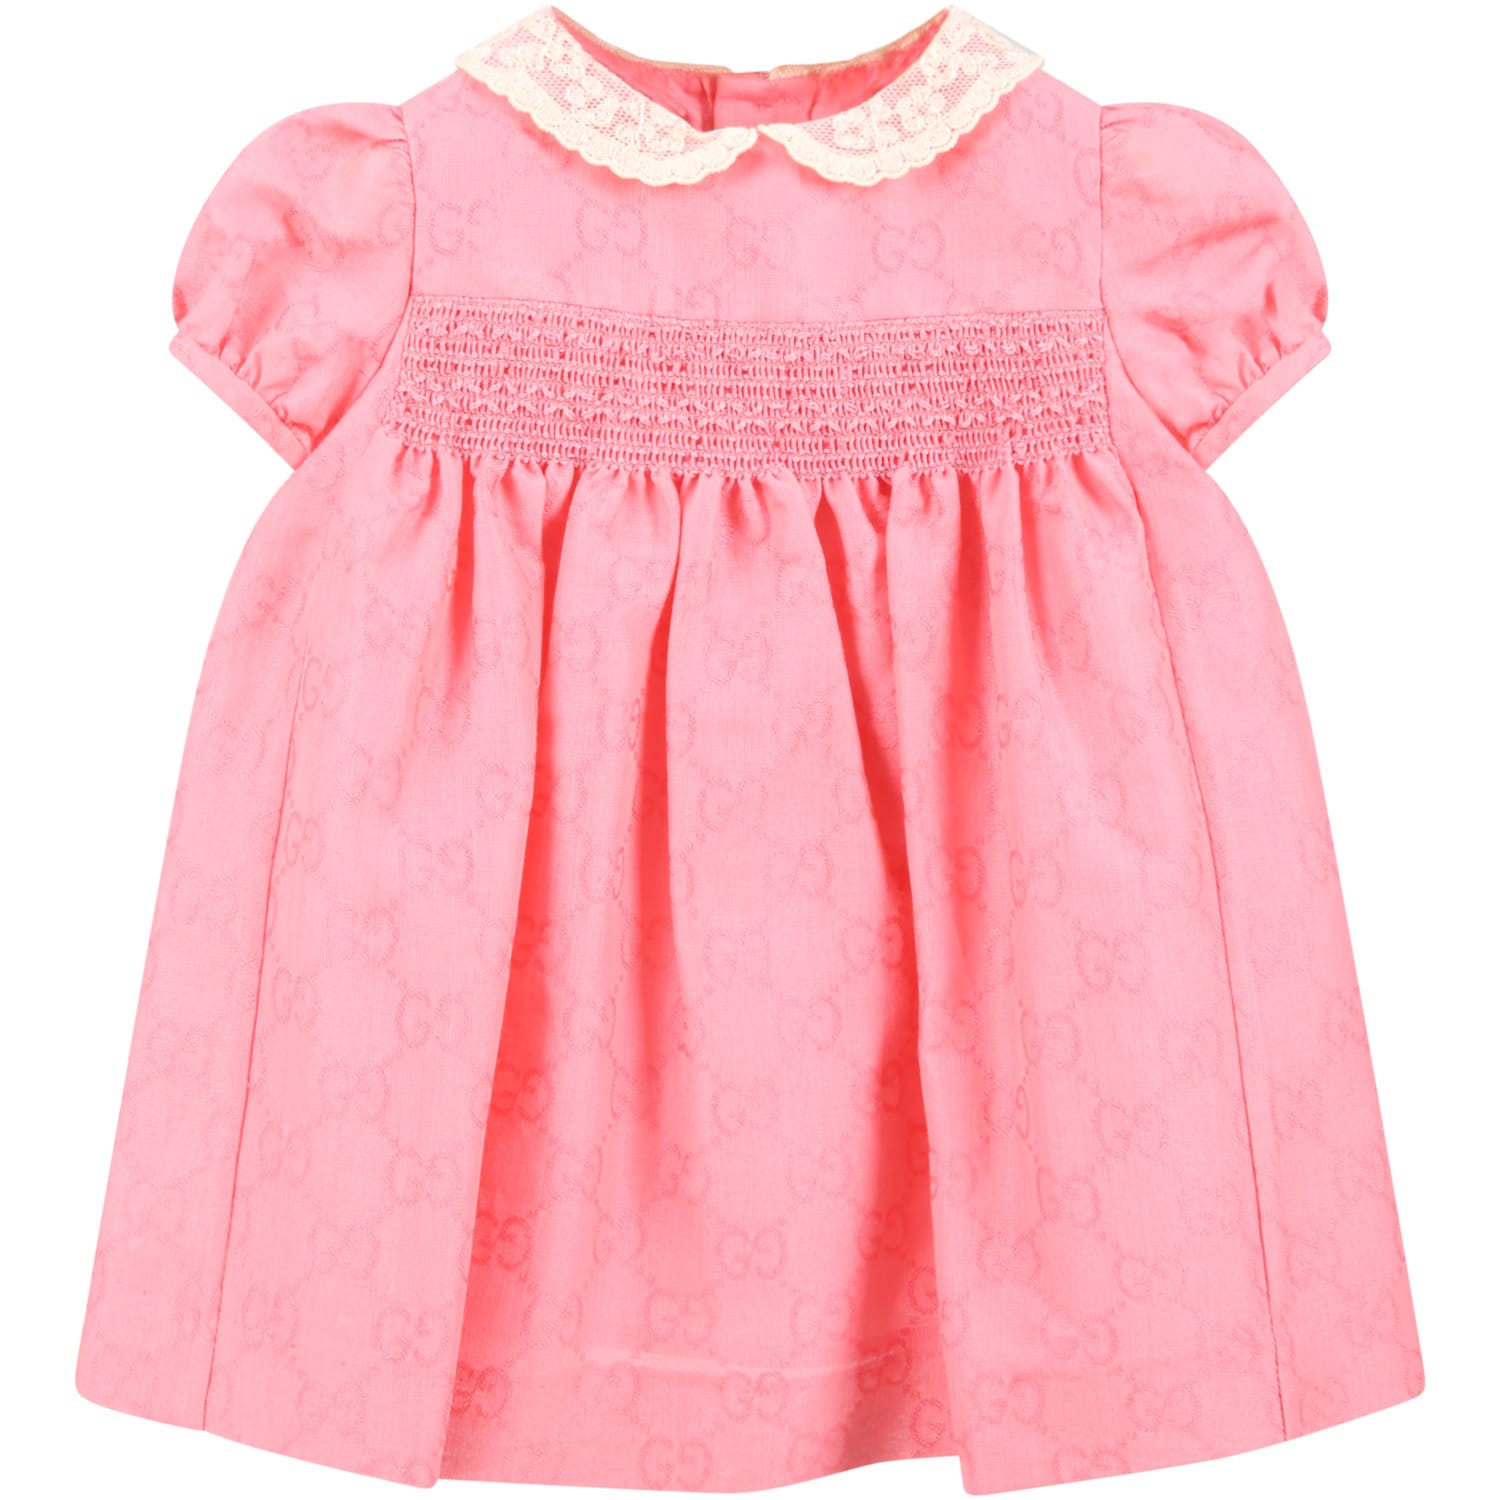 GUCCI PINK DRESS FOR BABYGIRL WITH DOUBLE GG,11812231